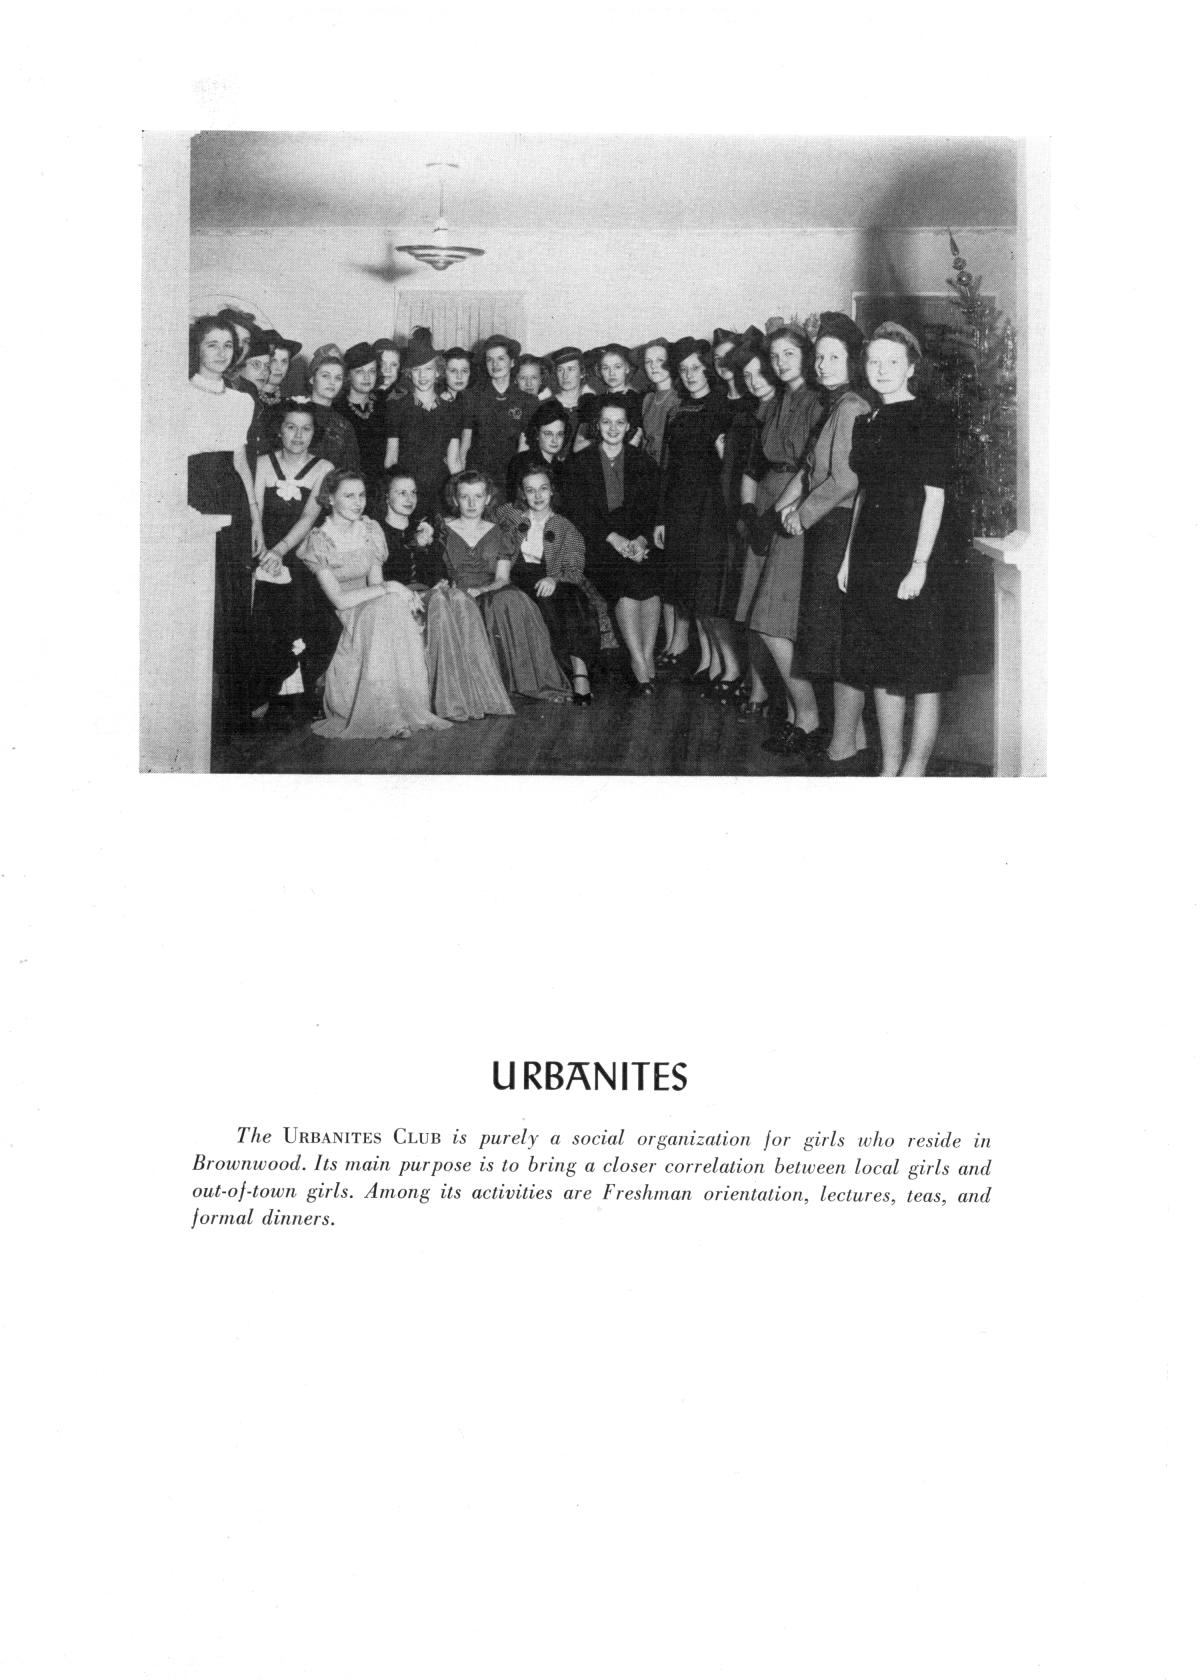 The Lasso, Yearbook of Howard Payne College, 1940
                                                
                                                    55
                                                